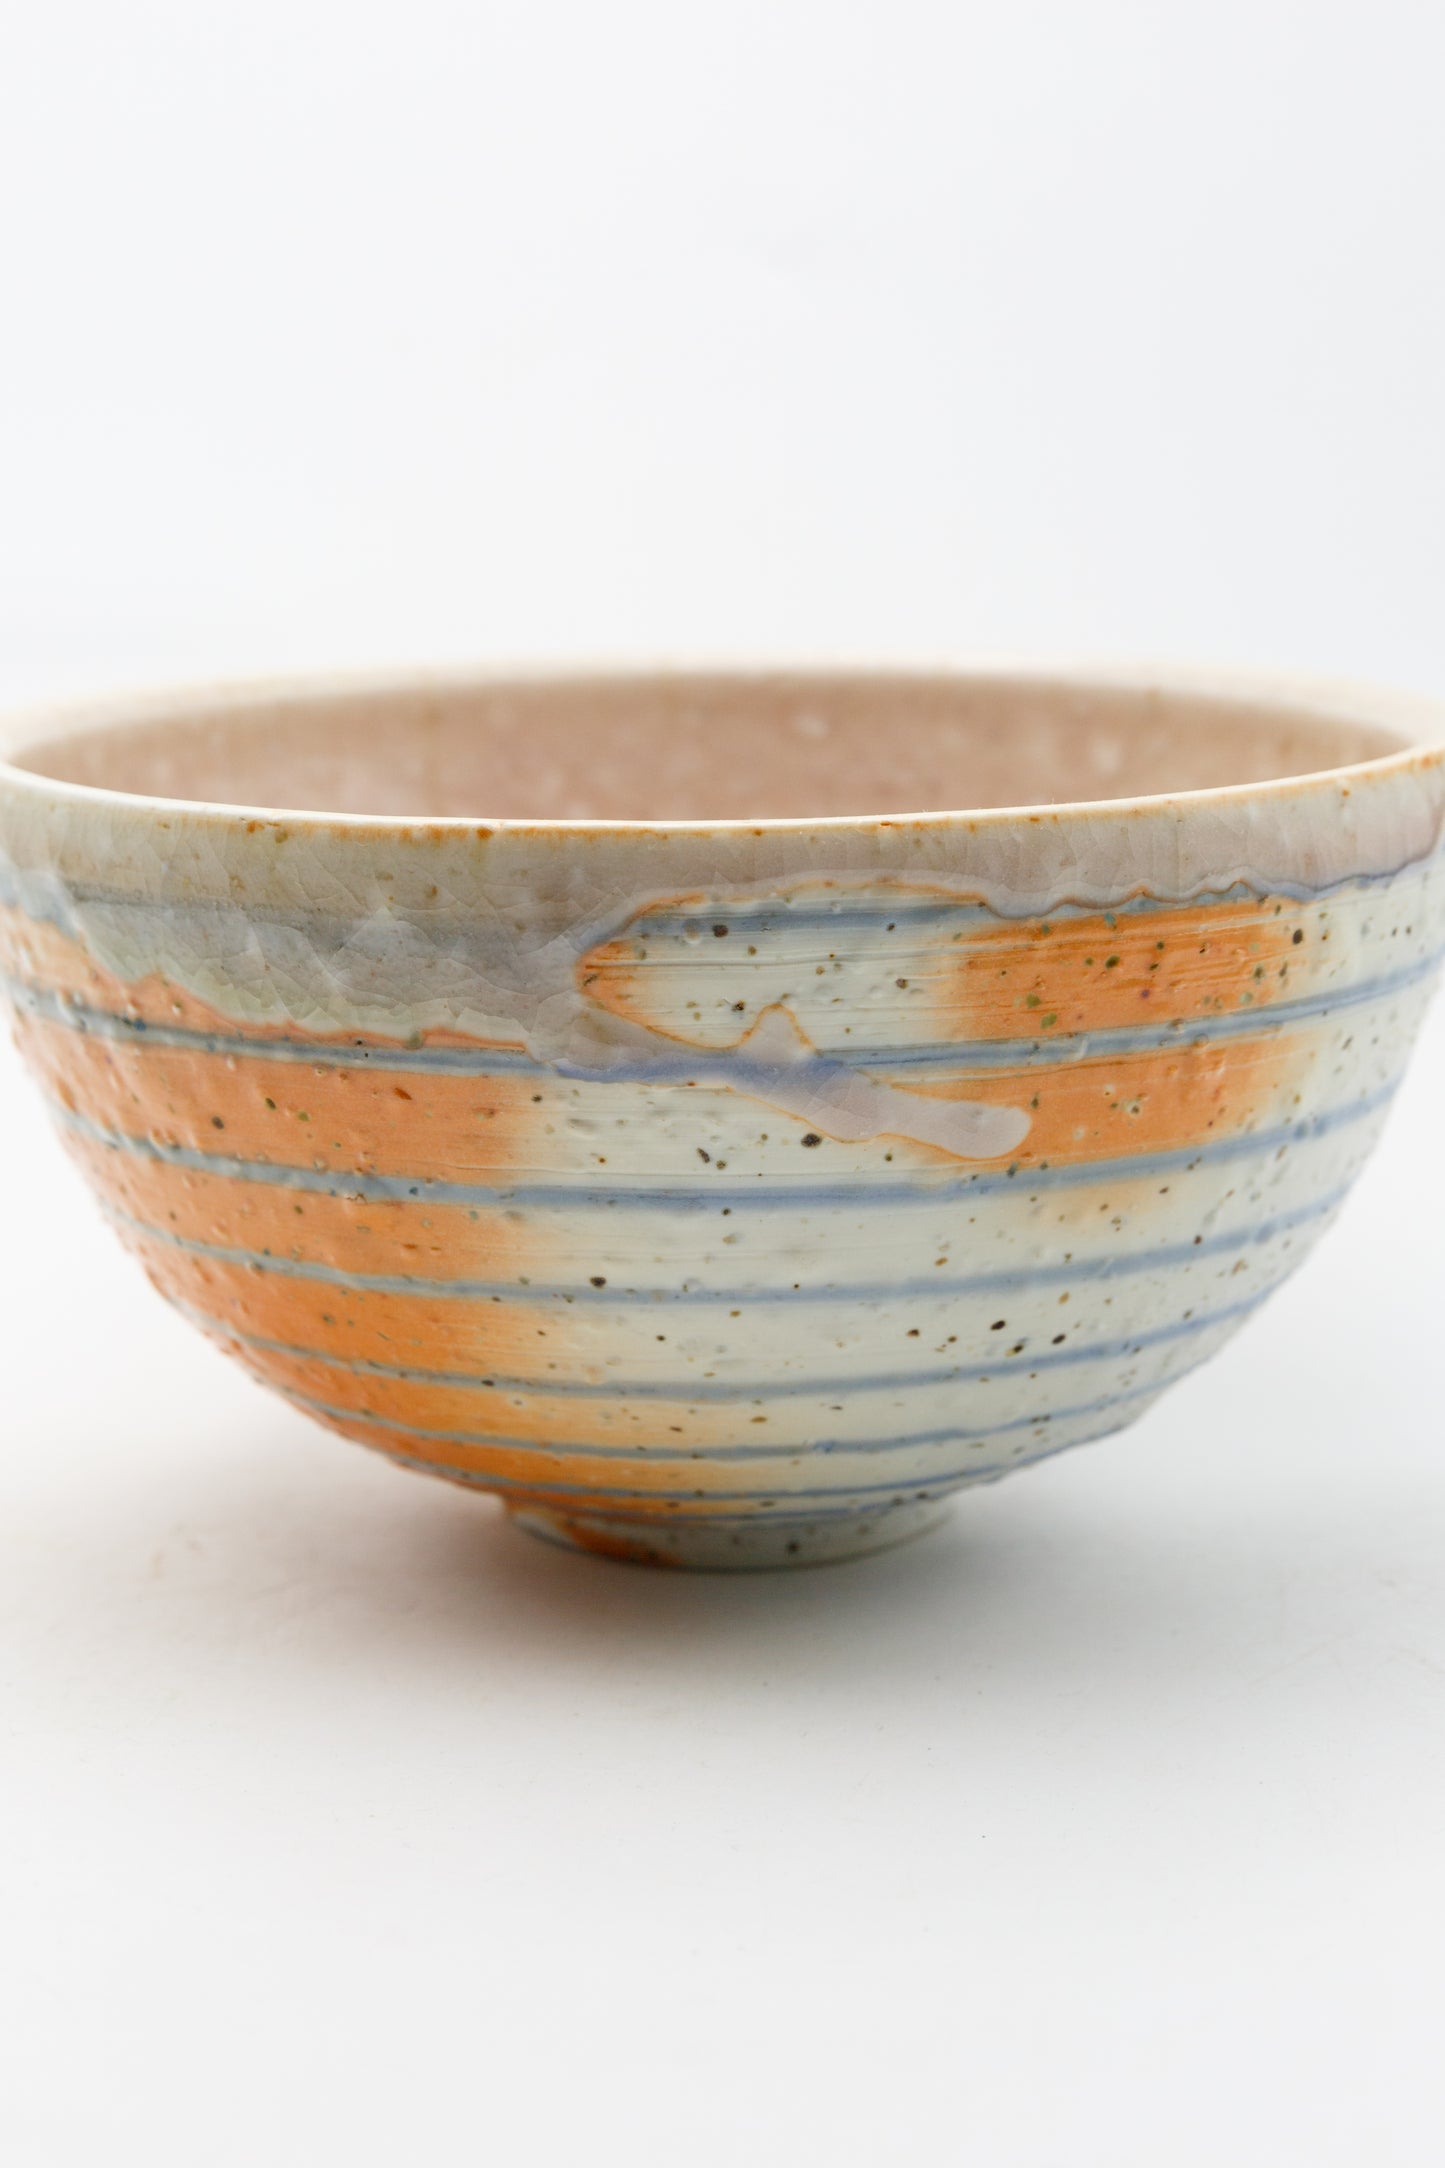 Wood Fired Bowl 023